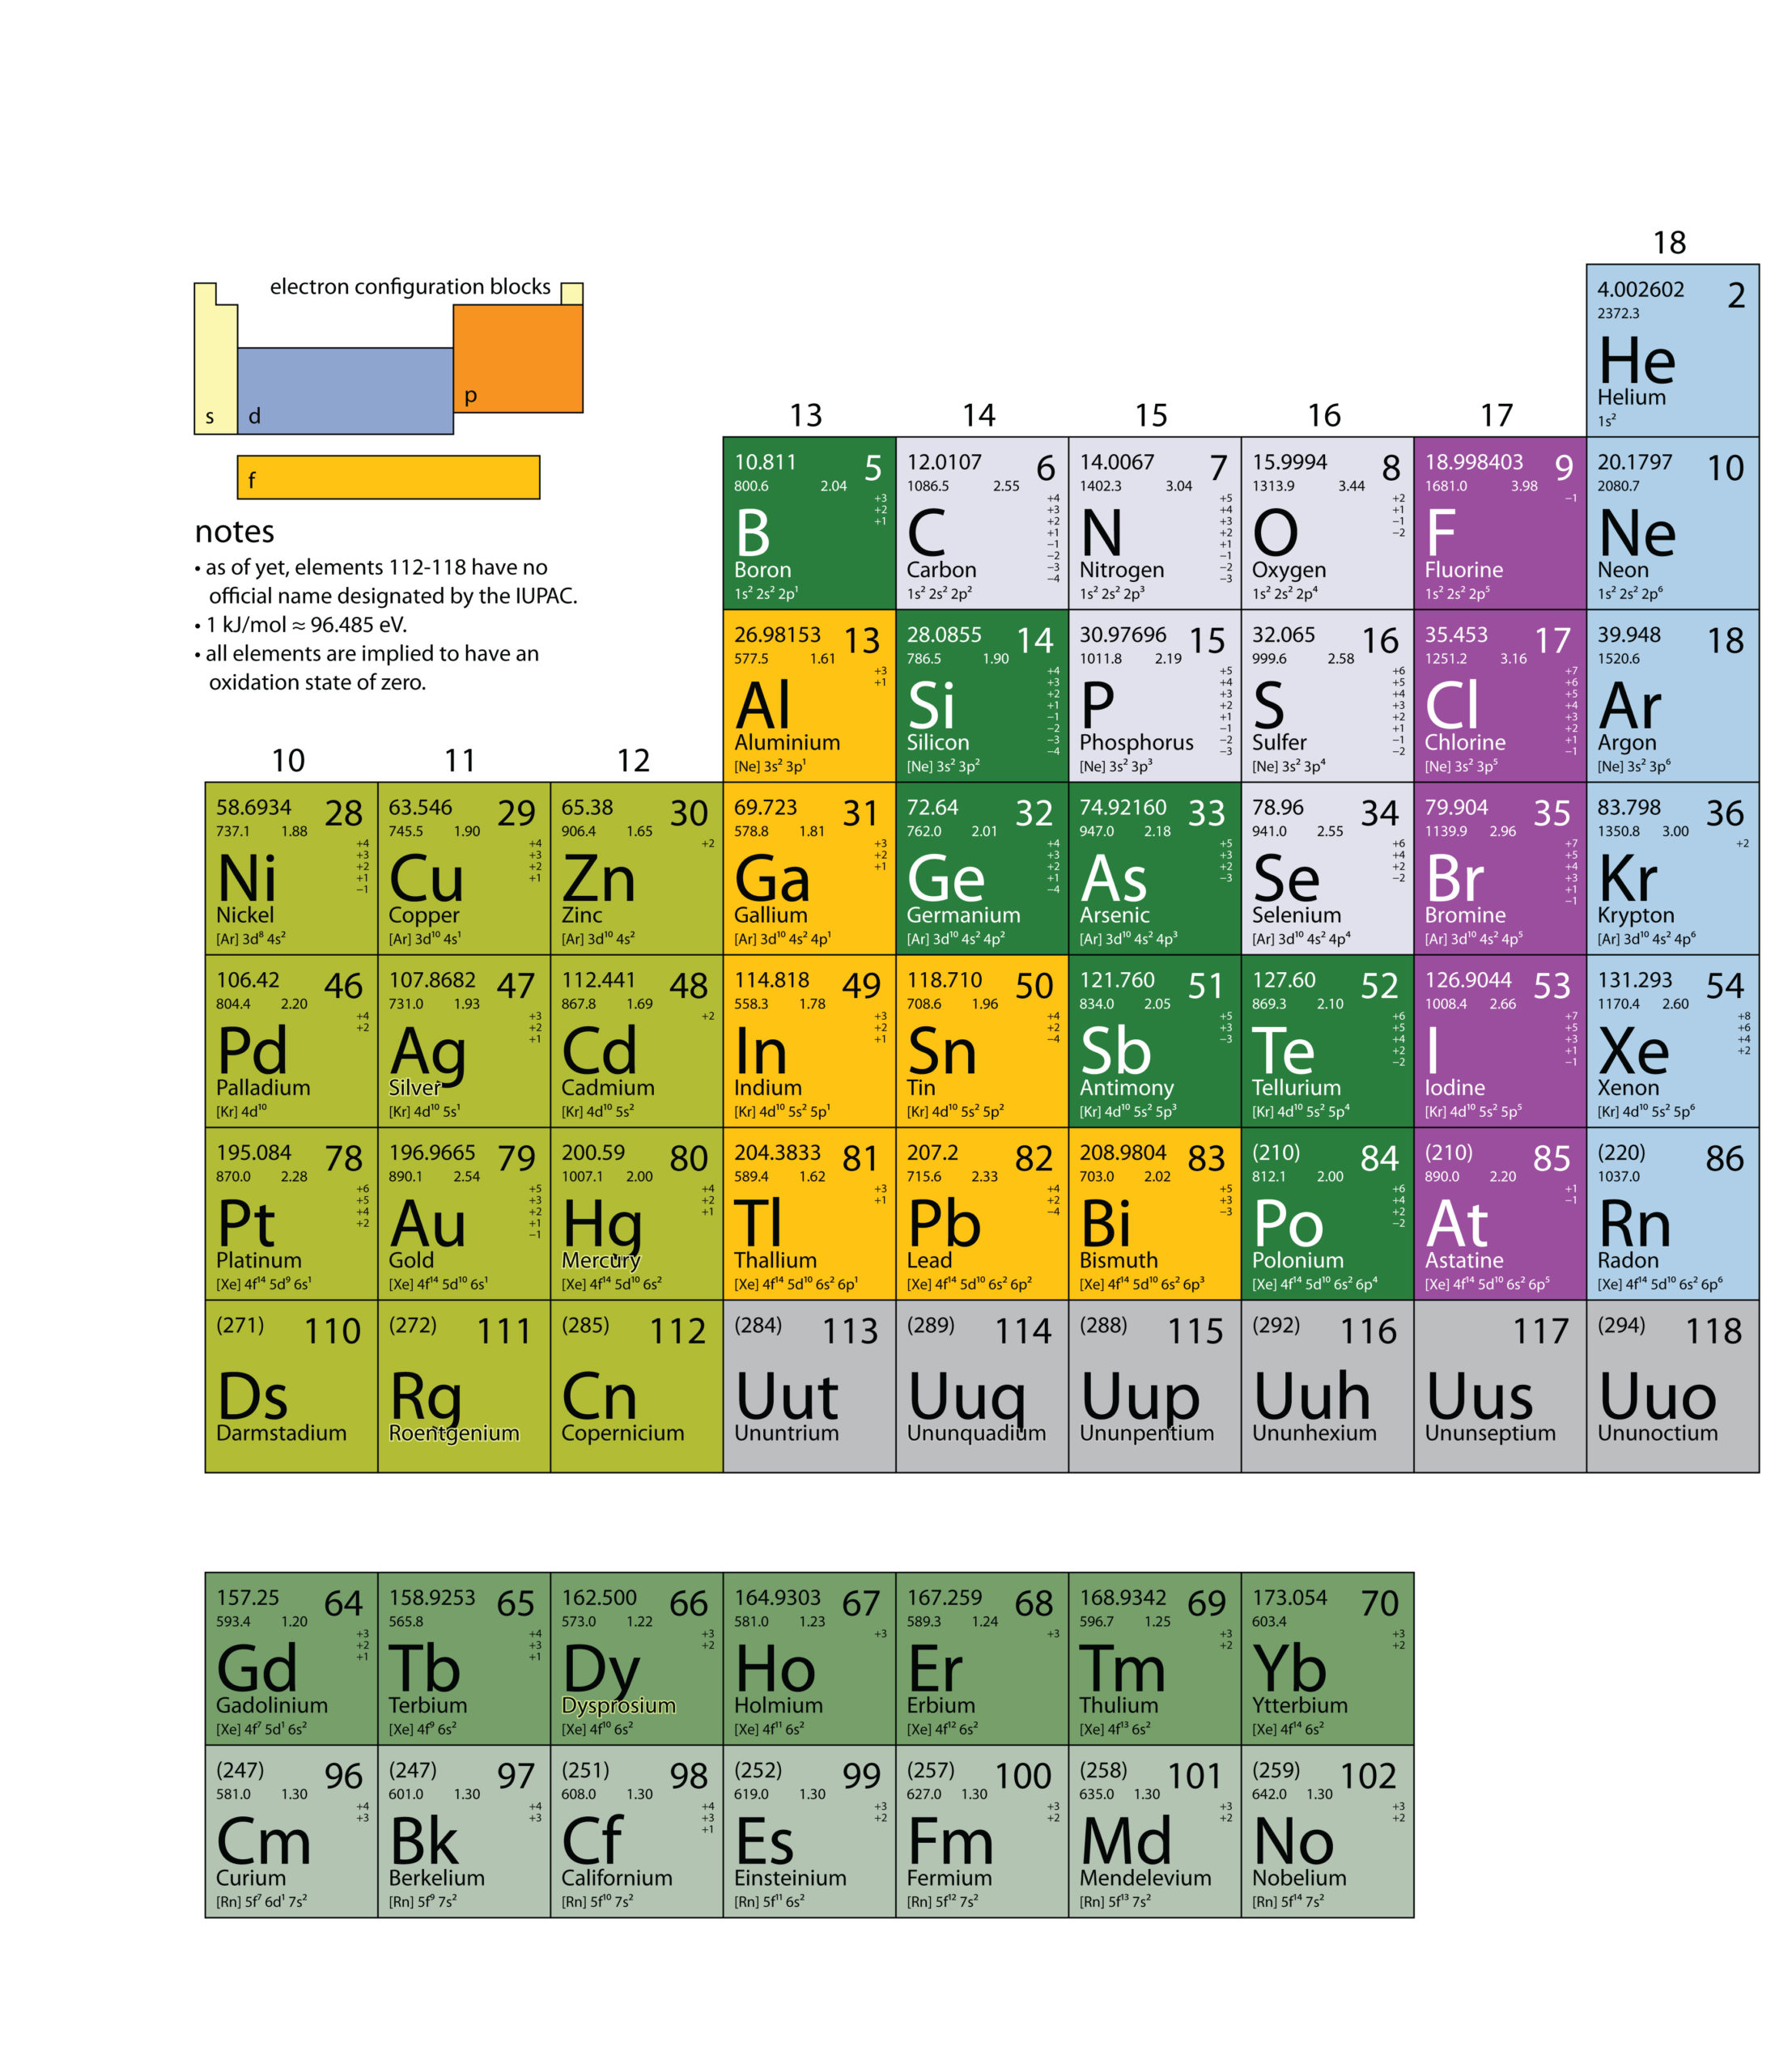 Second half of the periodic table of elements.